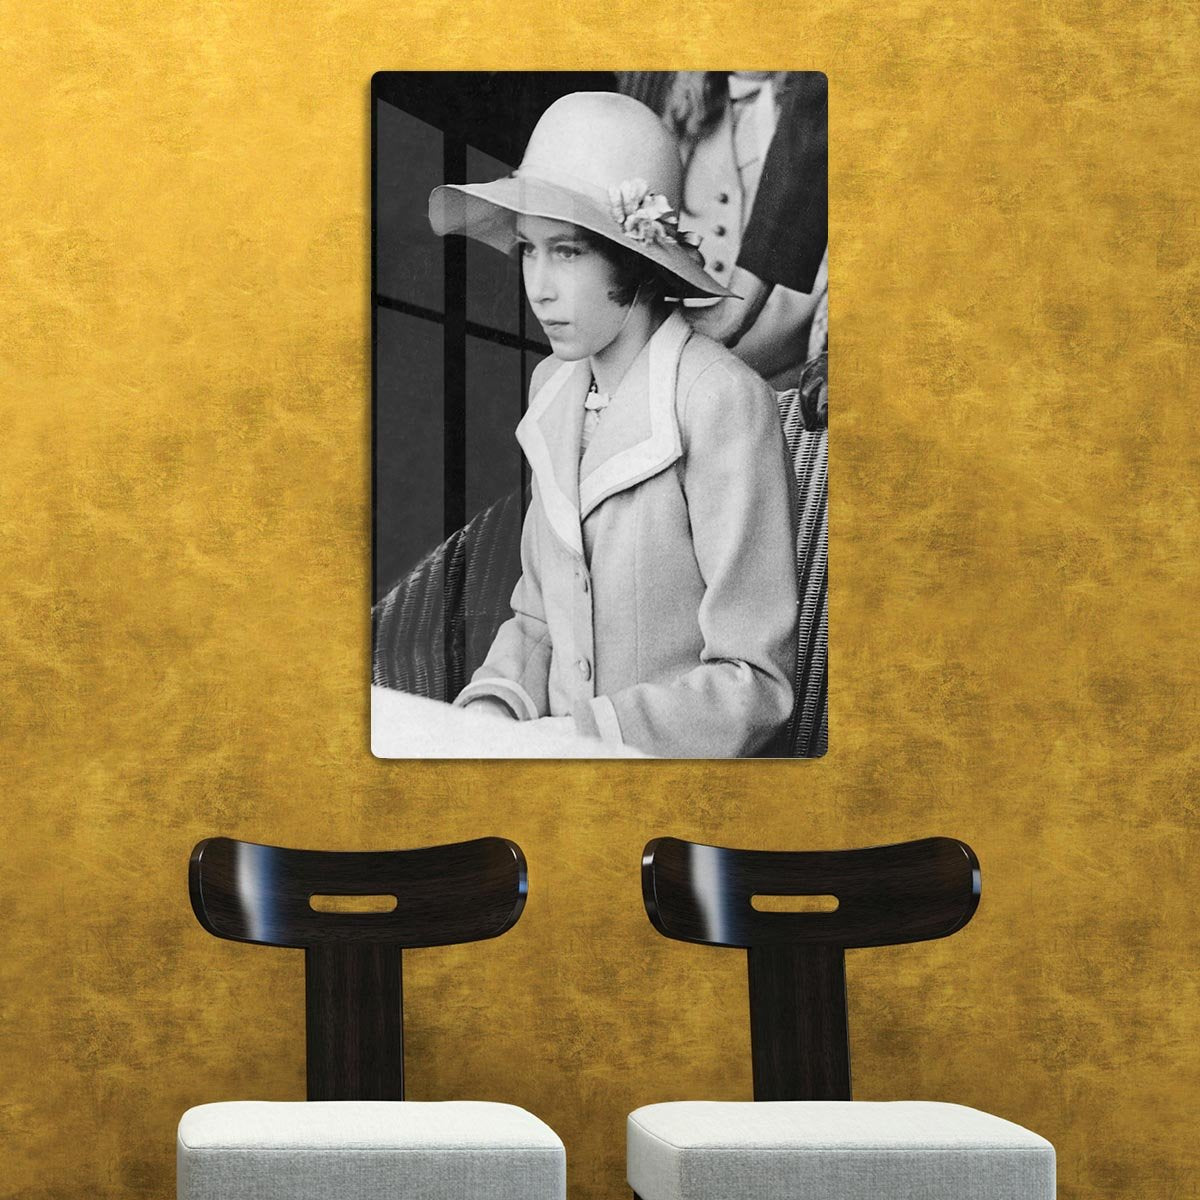 Queen Elizabeth II as a child seated in a hat HD Metal Print